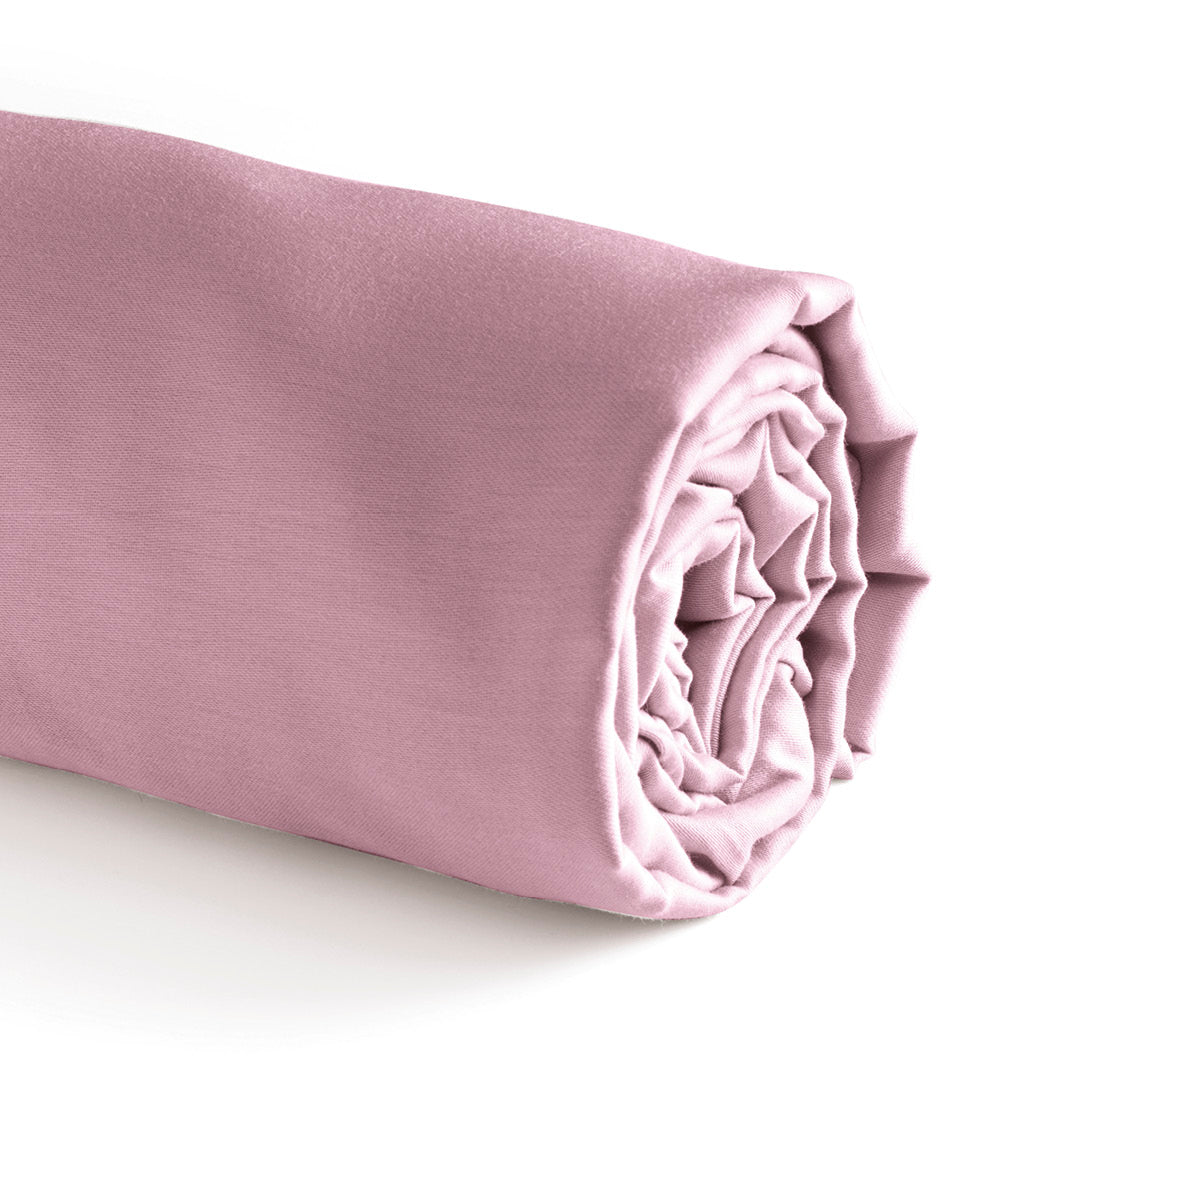 Fitted sheet cotton satin Uni Pink - 80 x 200 x 30 cm